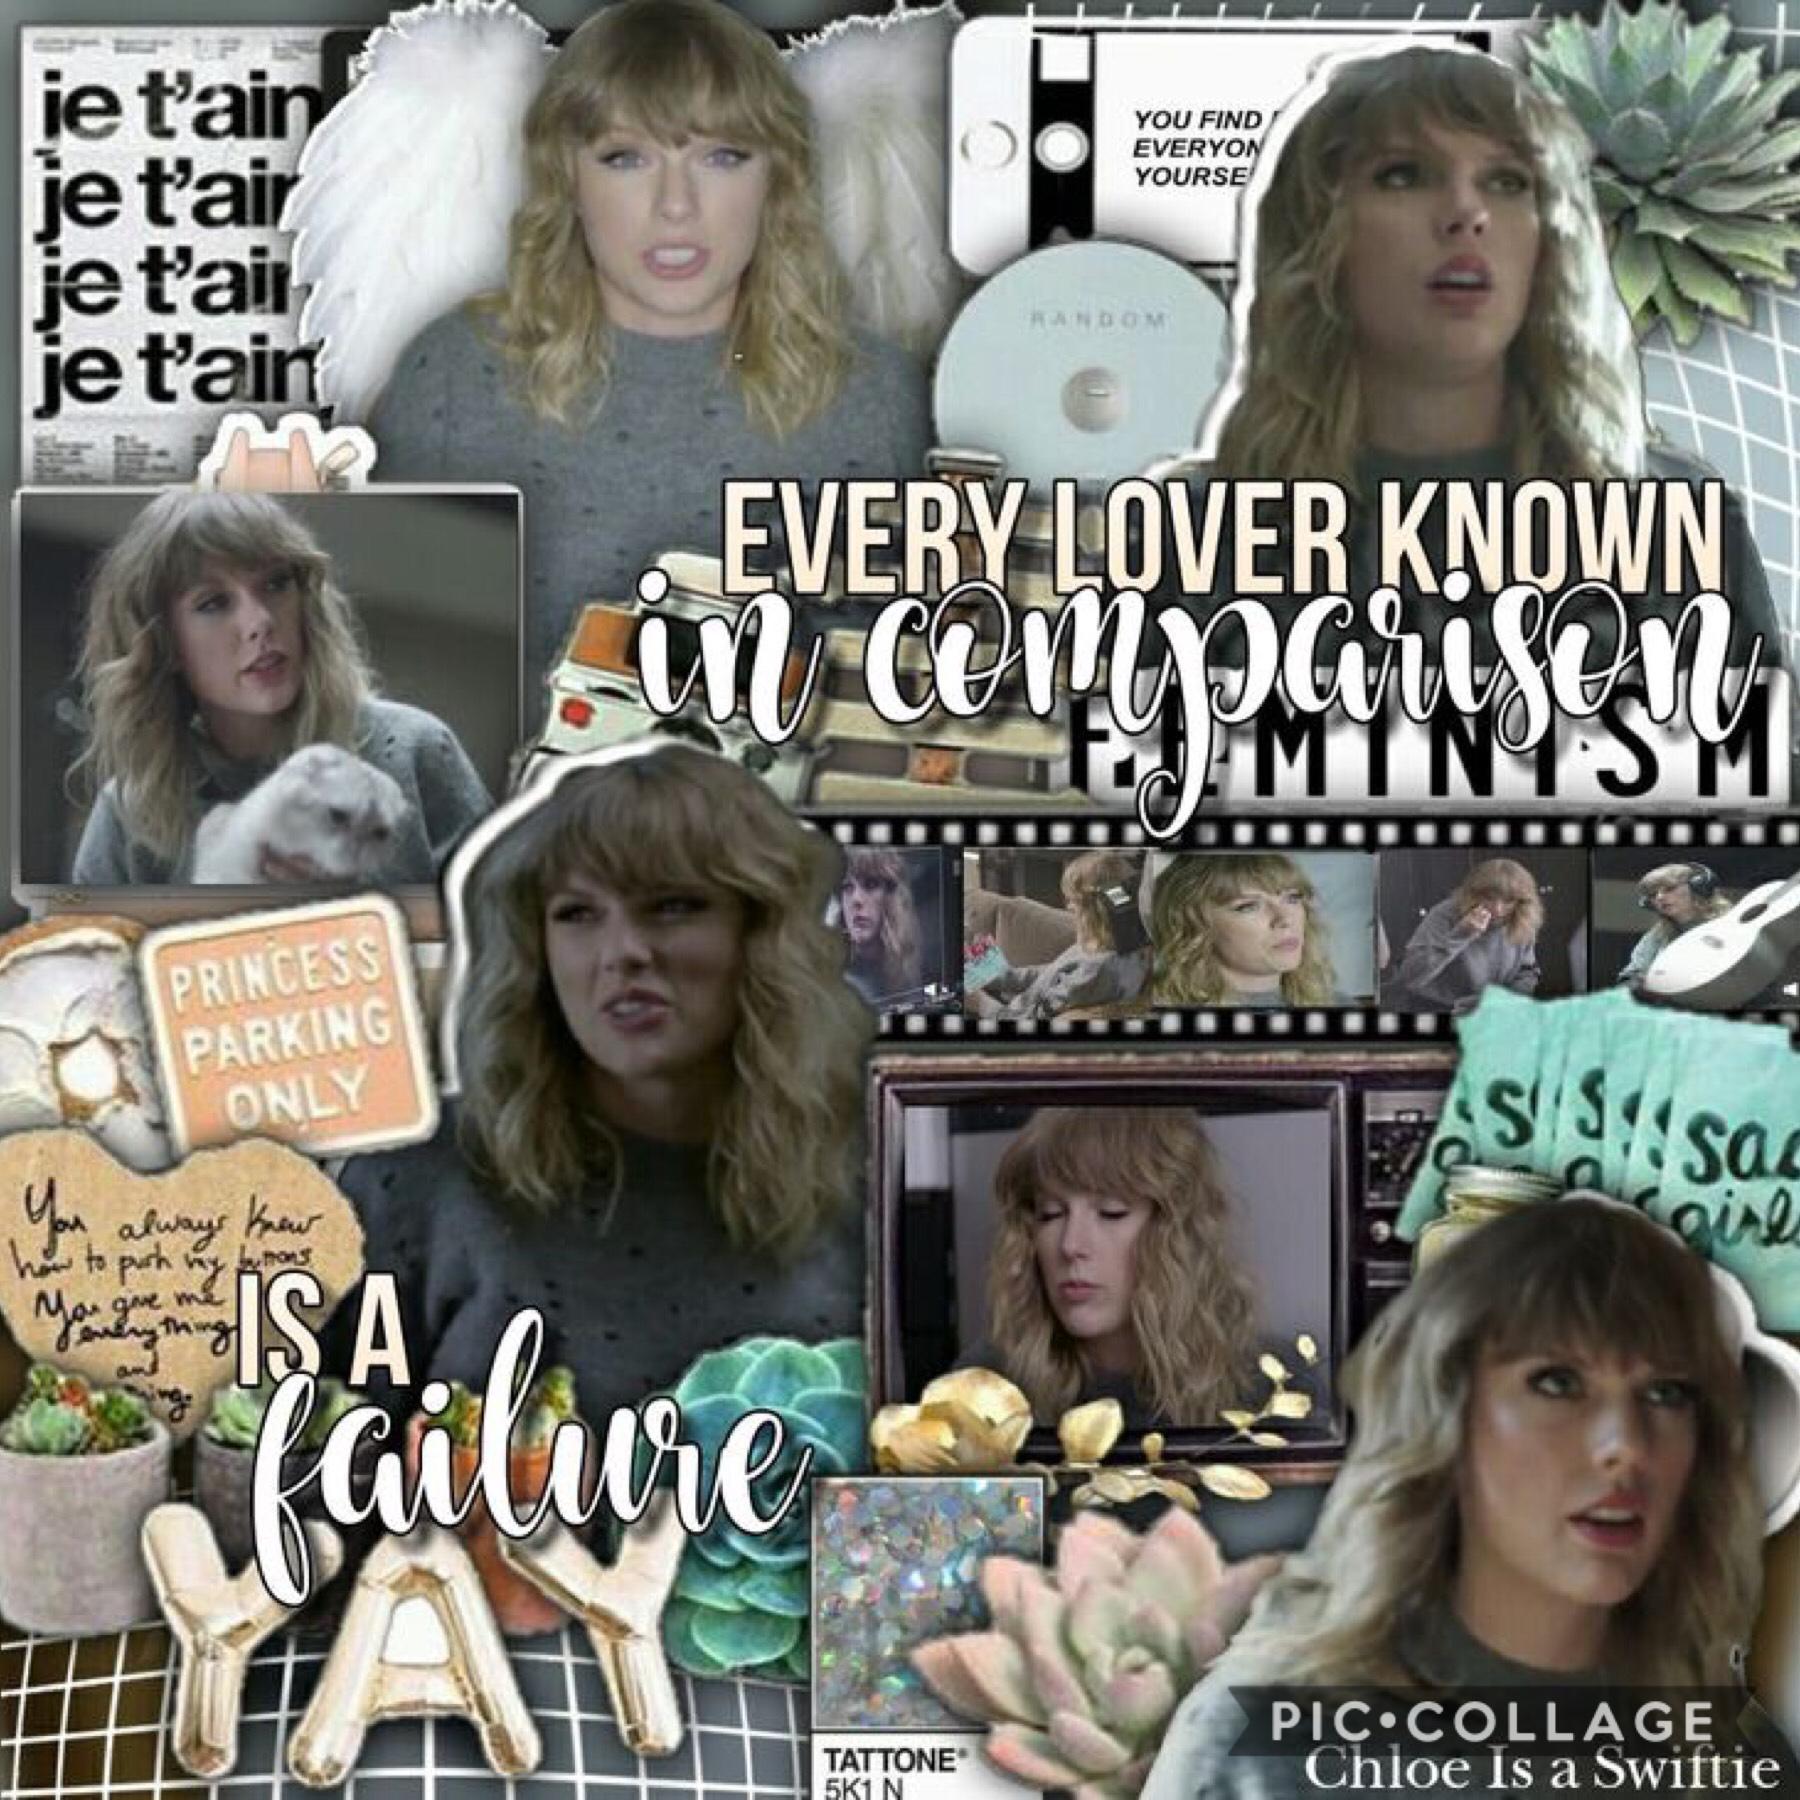 *warning not ours* made by: Chloe is a swiftie 